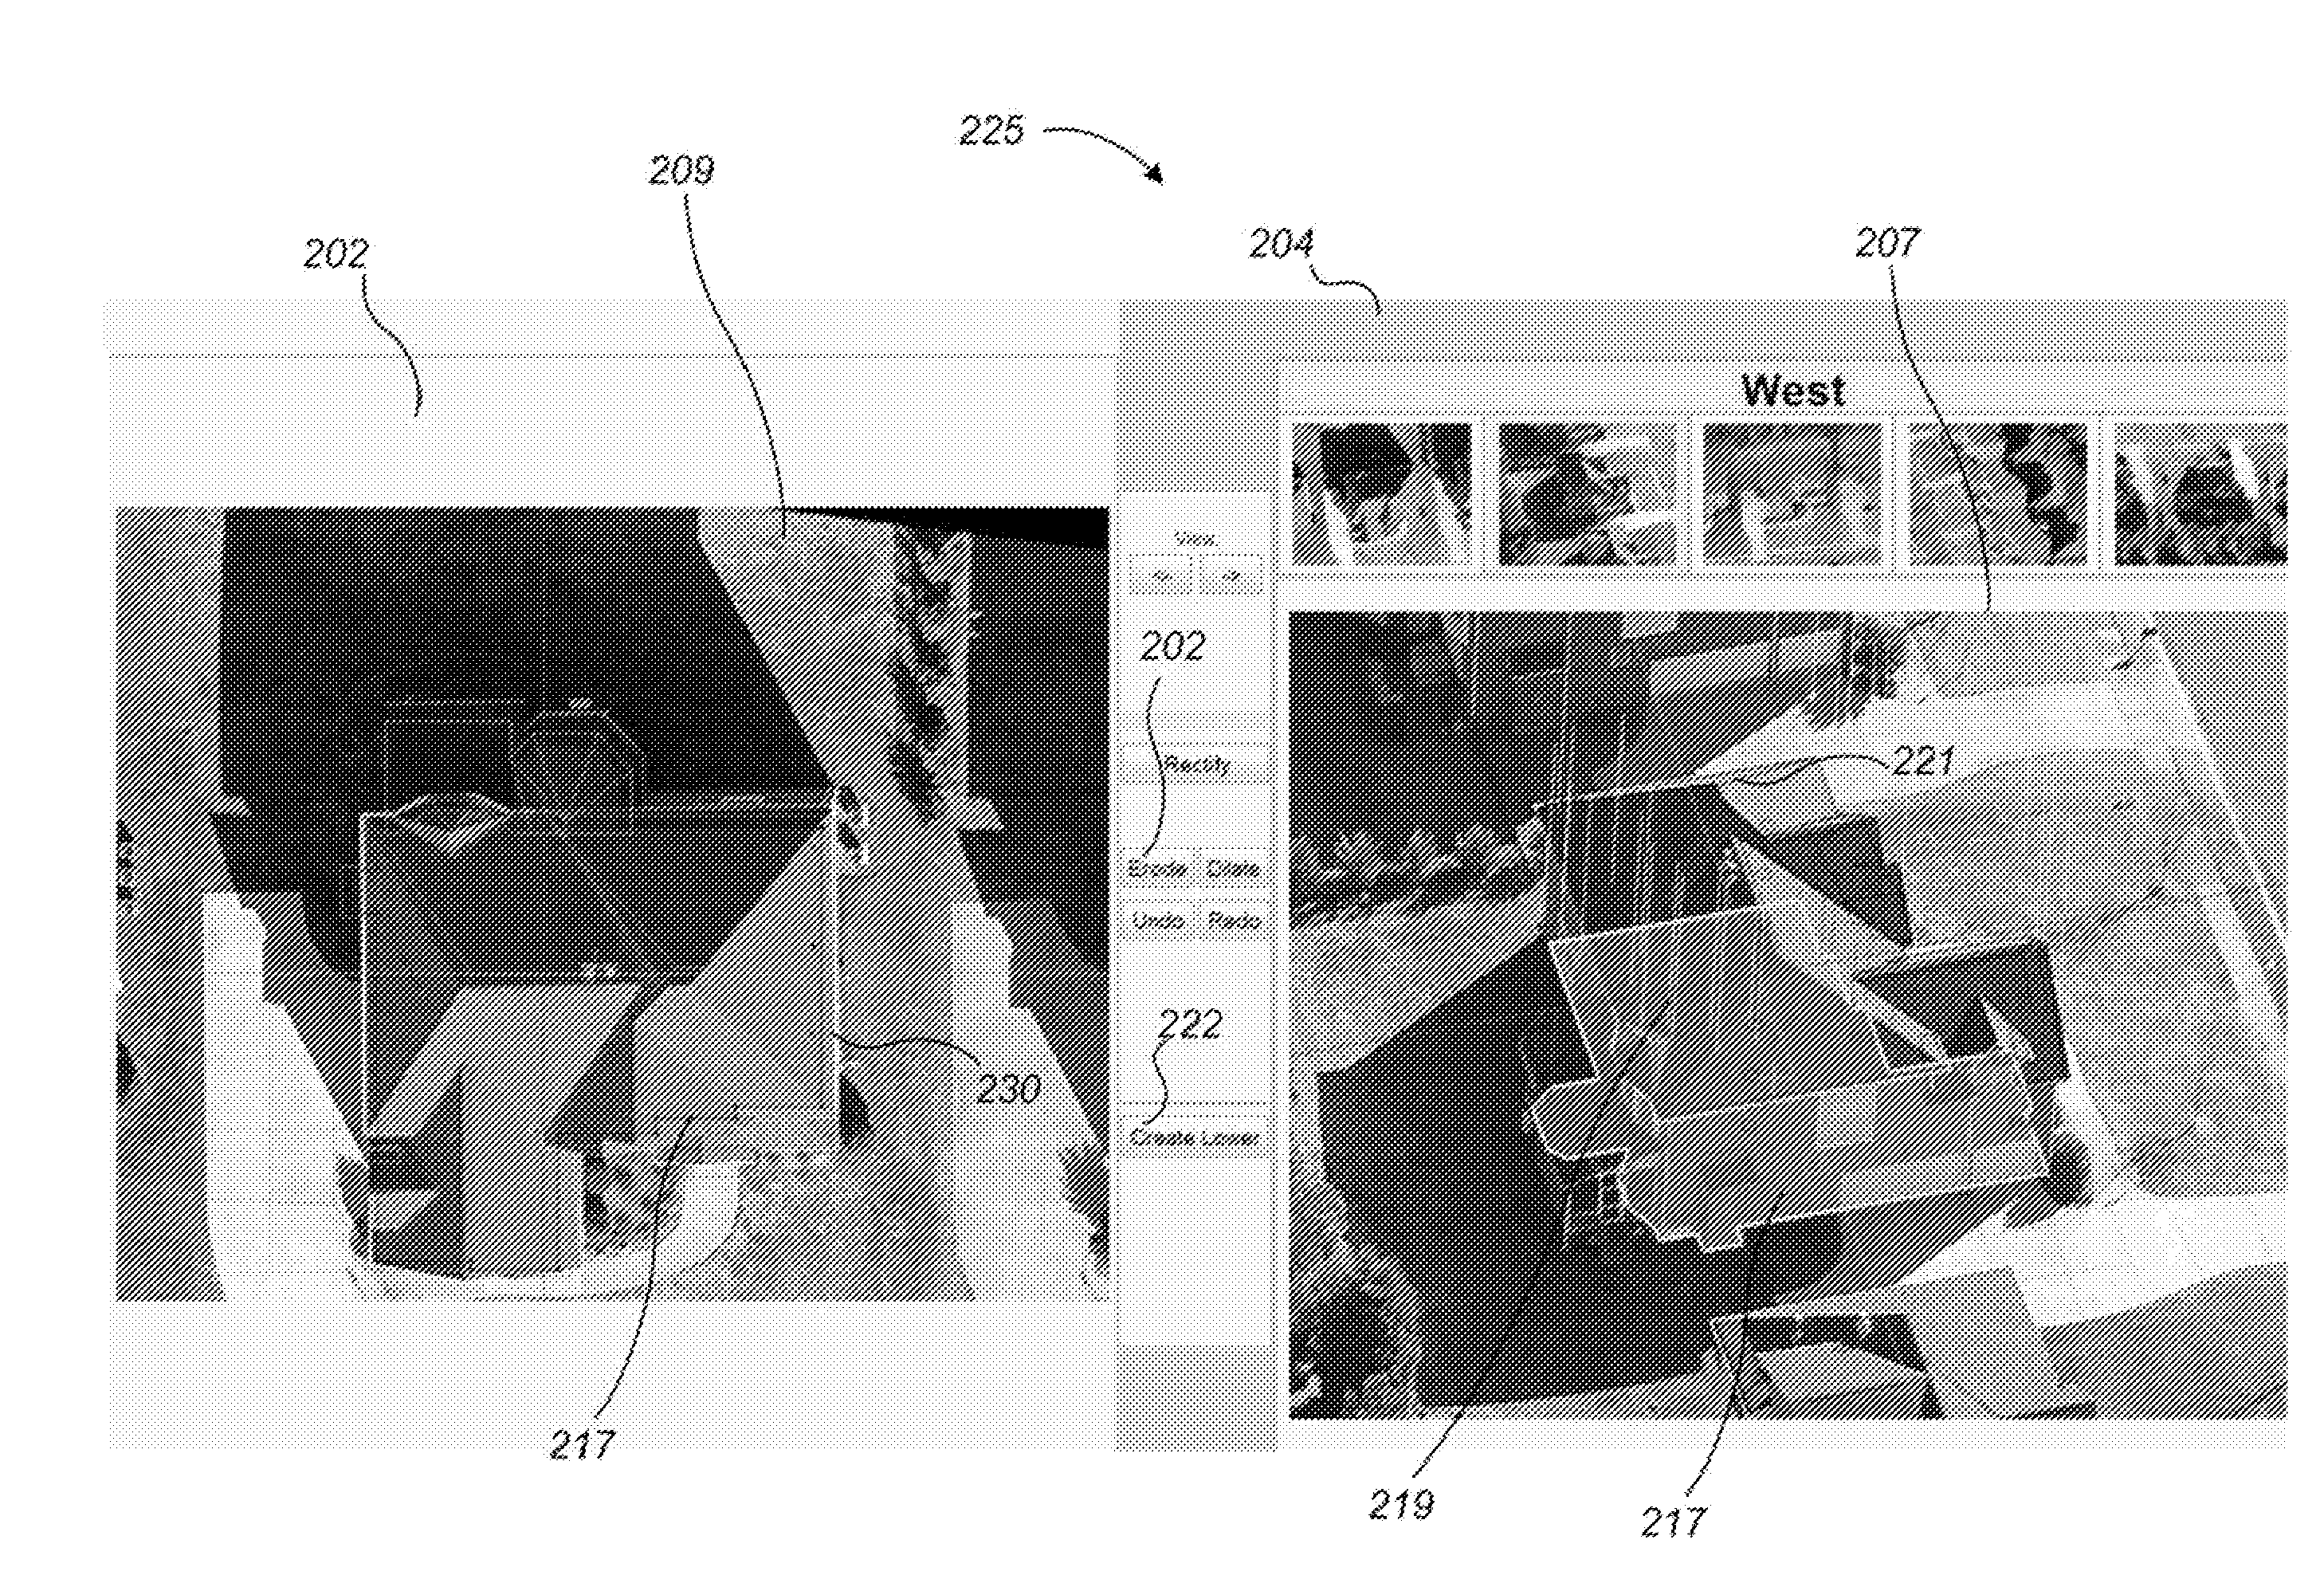 Systems and methods for estimation of building wall area and producing a wall estimation report